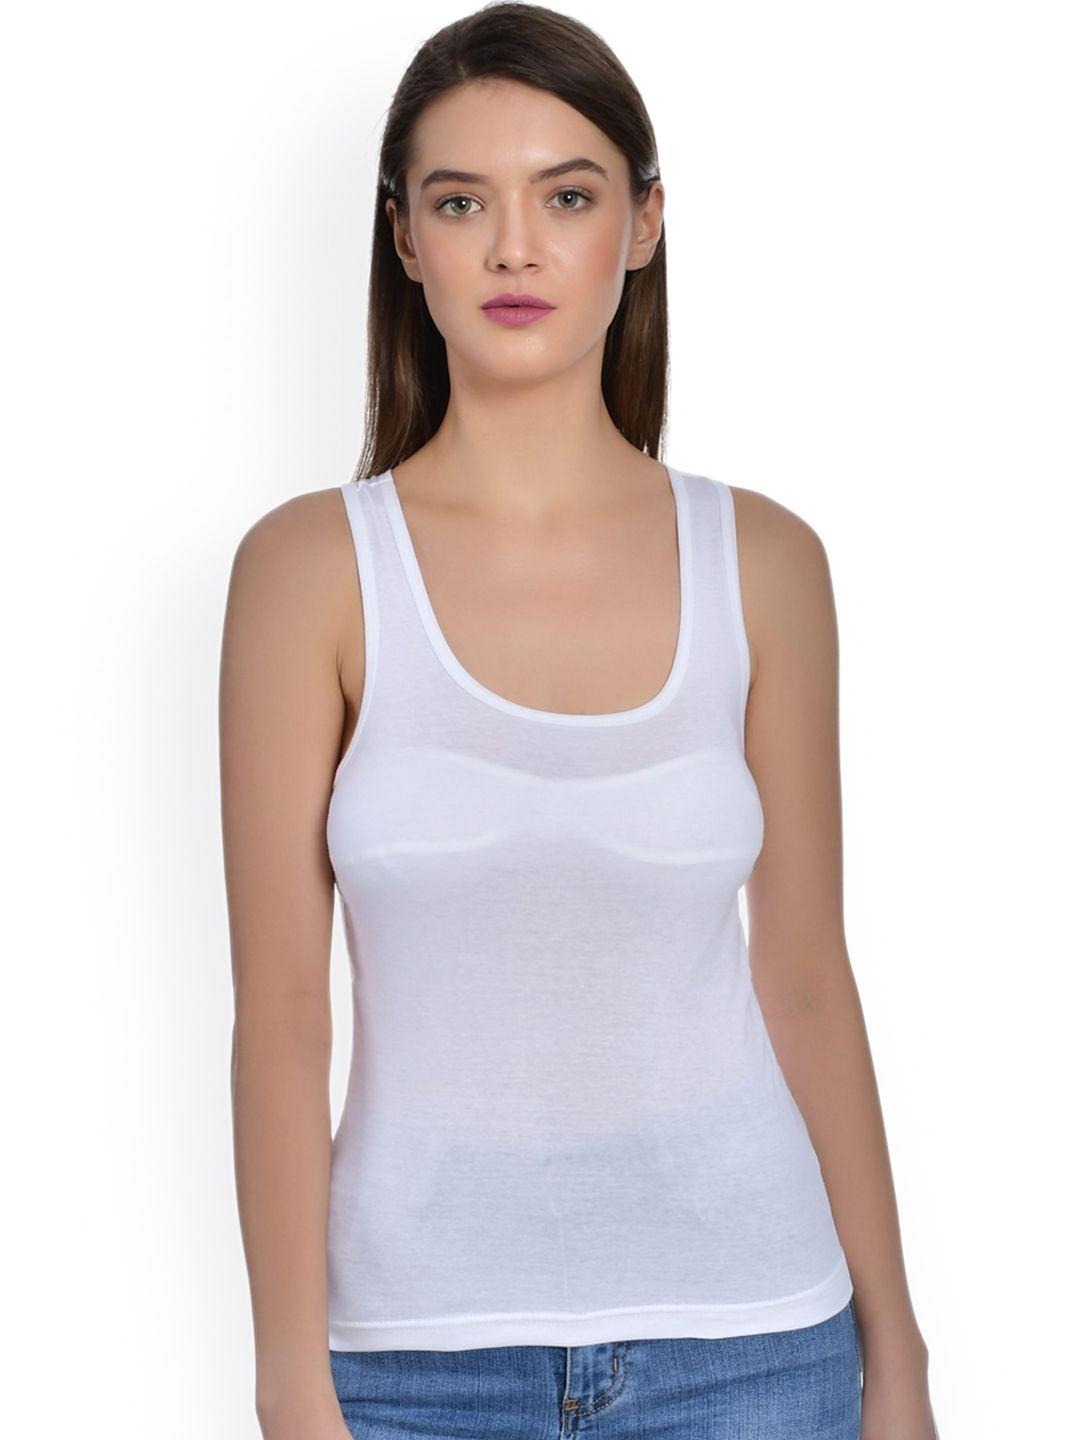 aimly-non-padded-cotton-camisoles